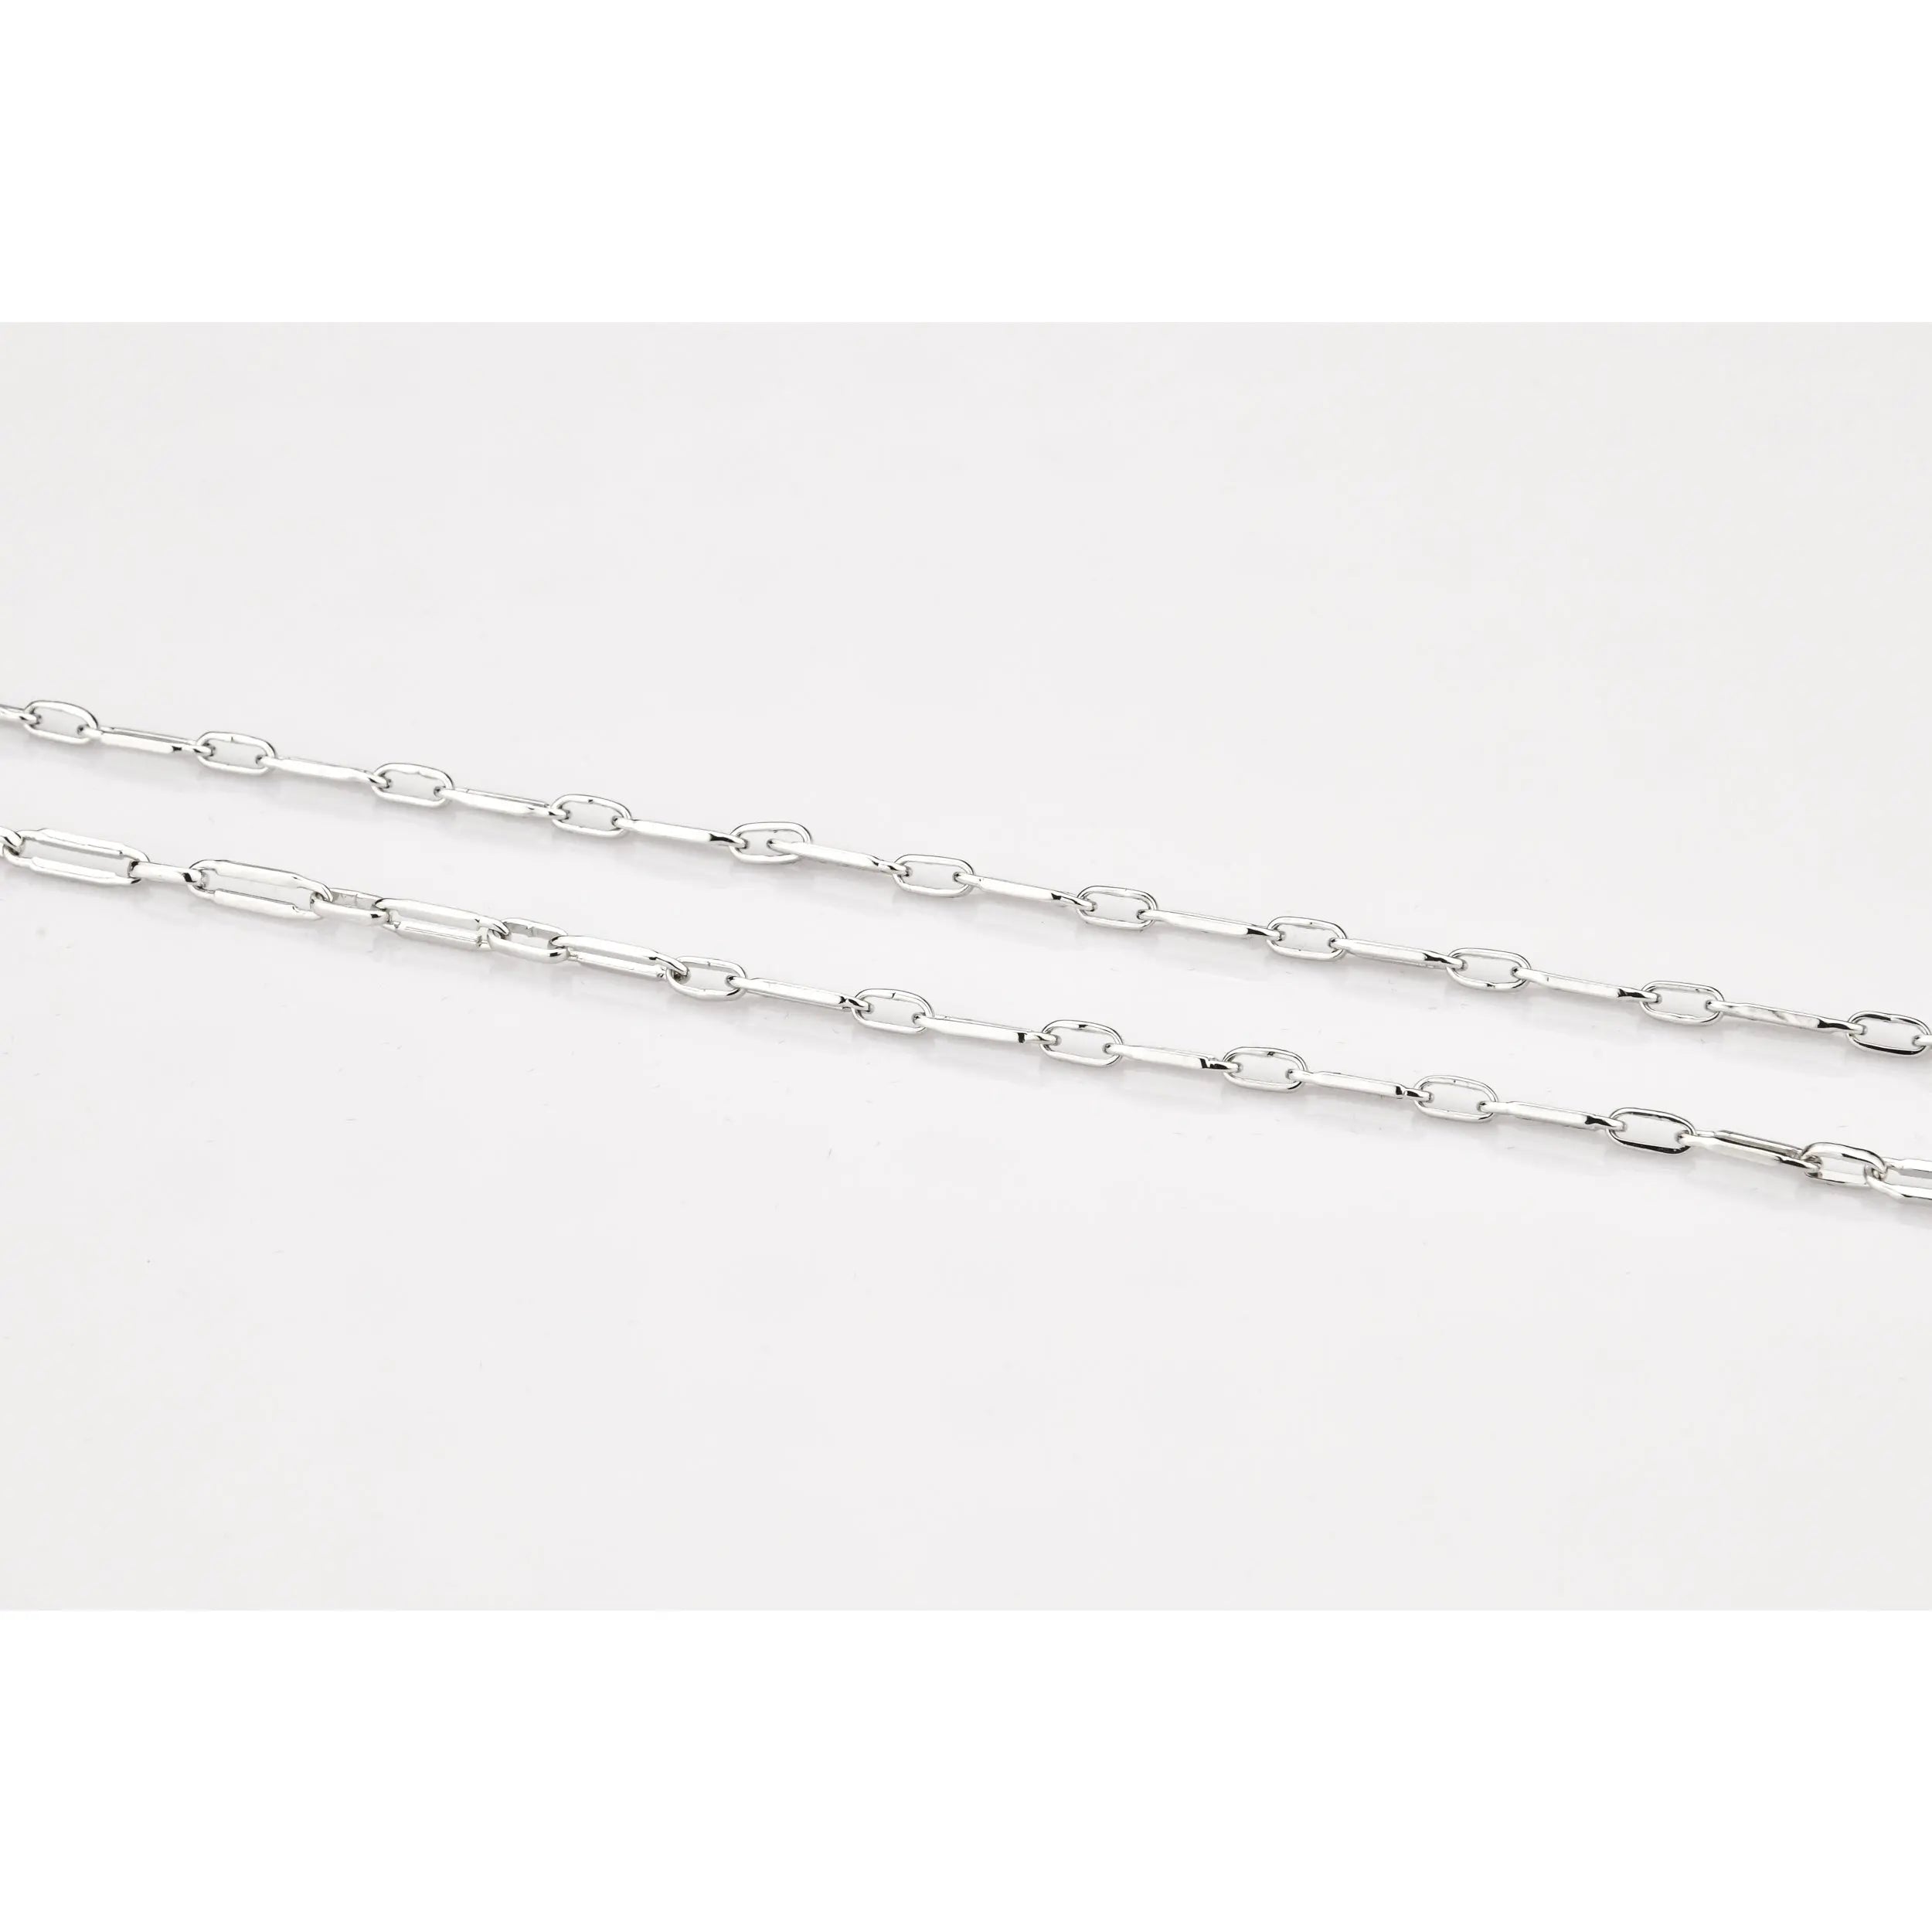 Platinum Chain with loops JL PT CH 802   Jewelove.US